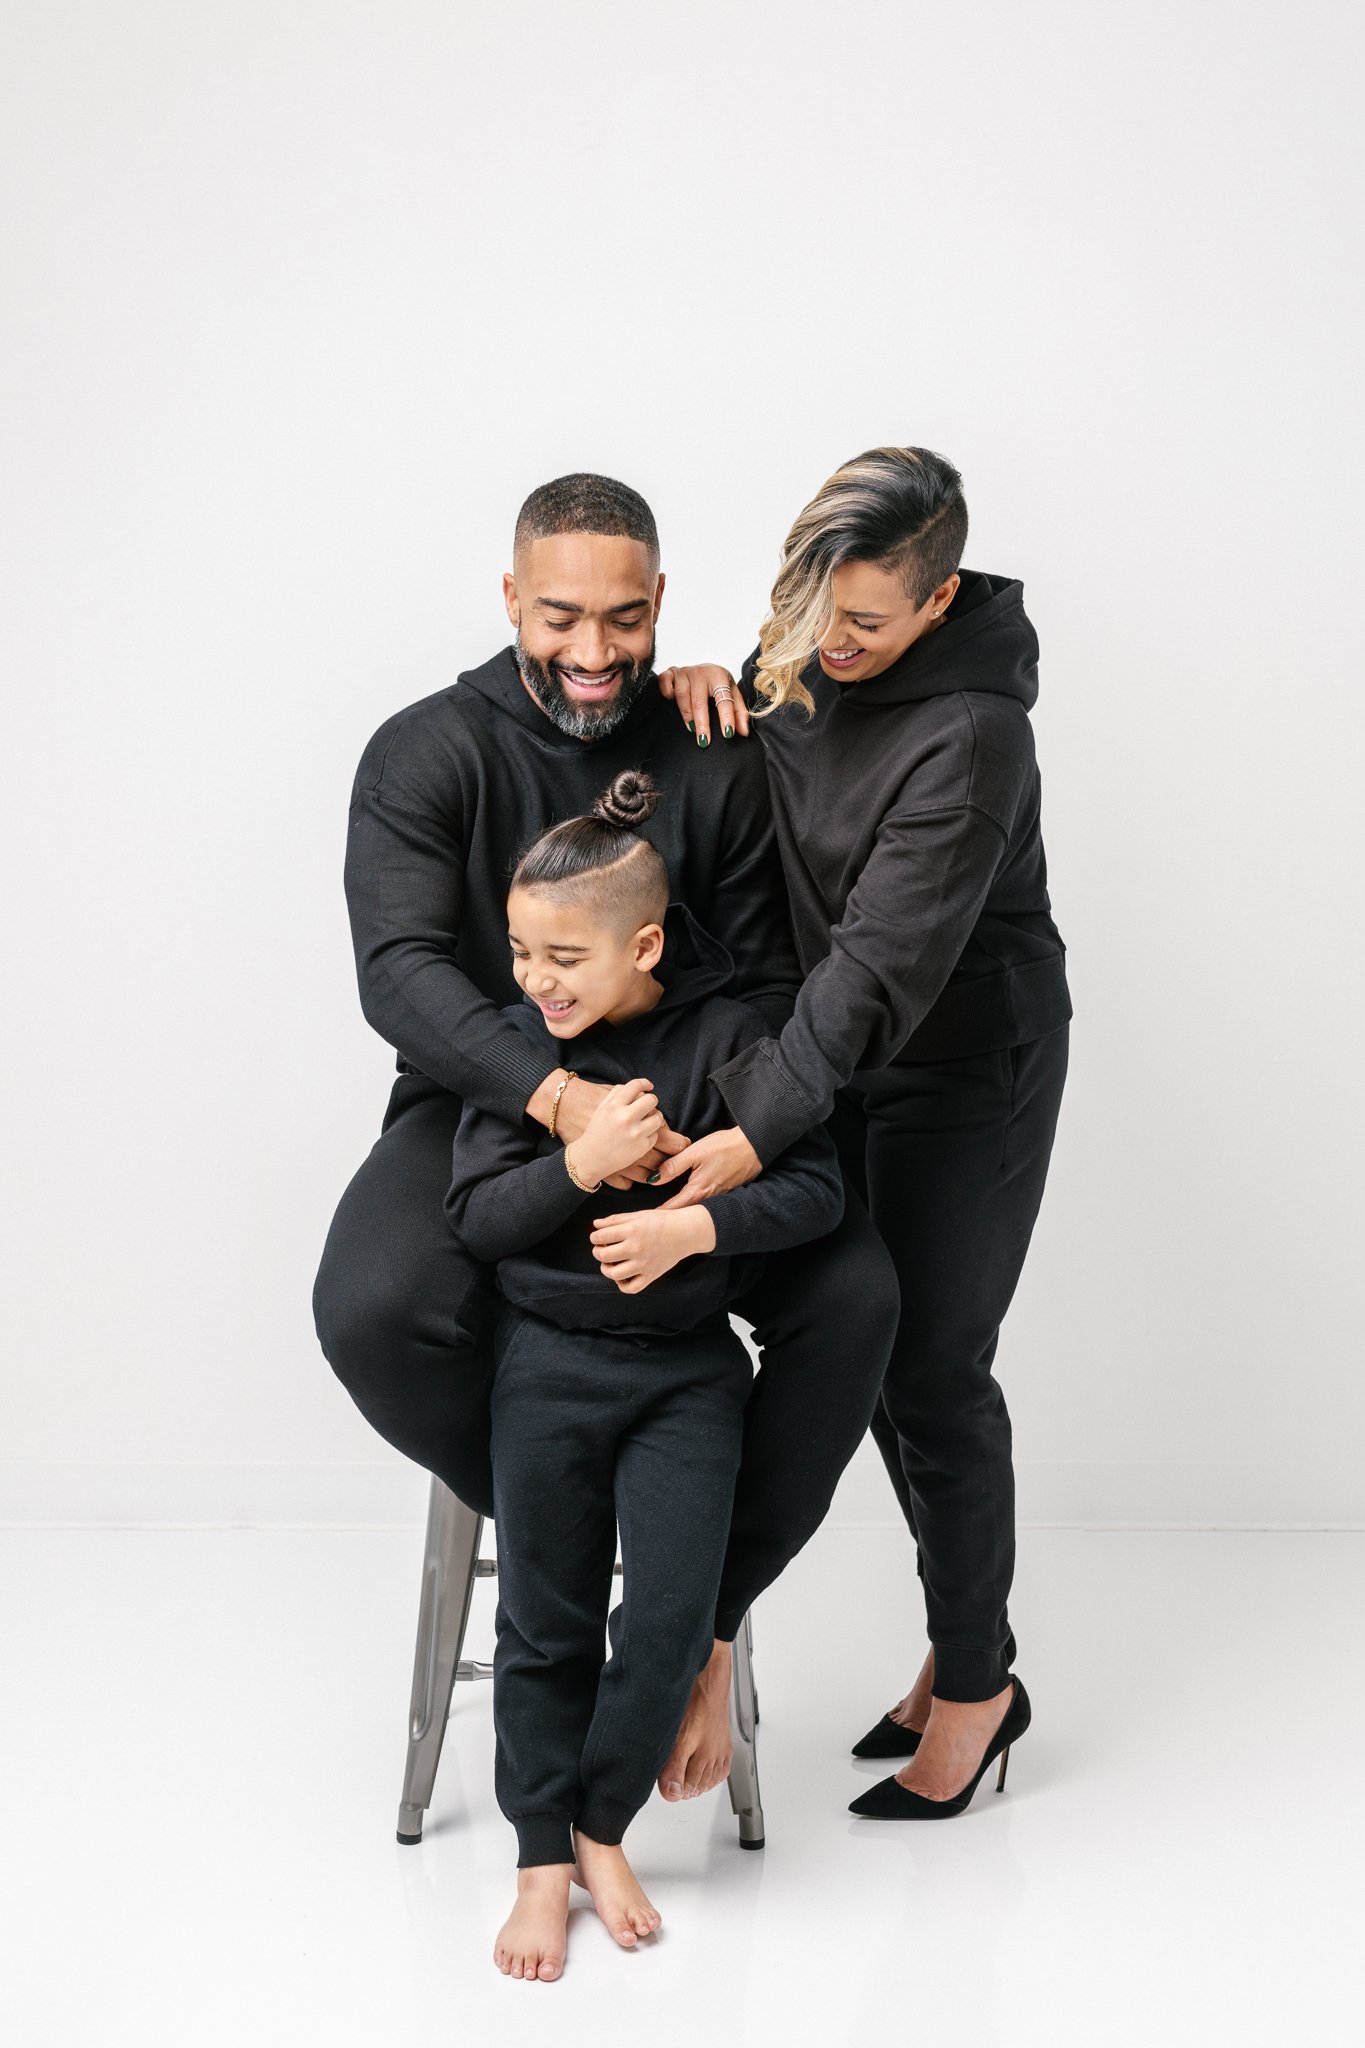  A little boy sits on a stool while his mother and father hug him by Nicole Hawkins Photography. family with boy #NicoleHawkinsPhotograaphy #NicoleHawkinsFamilies #Modernfamilypictures #studioportraits #matchingfamilyoutfits #NJphotographer 